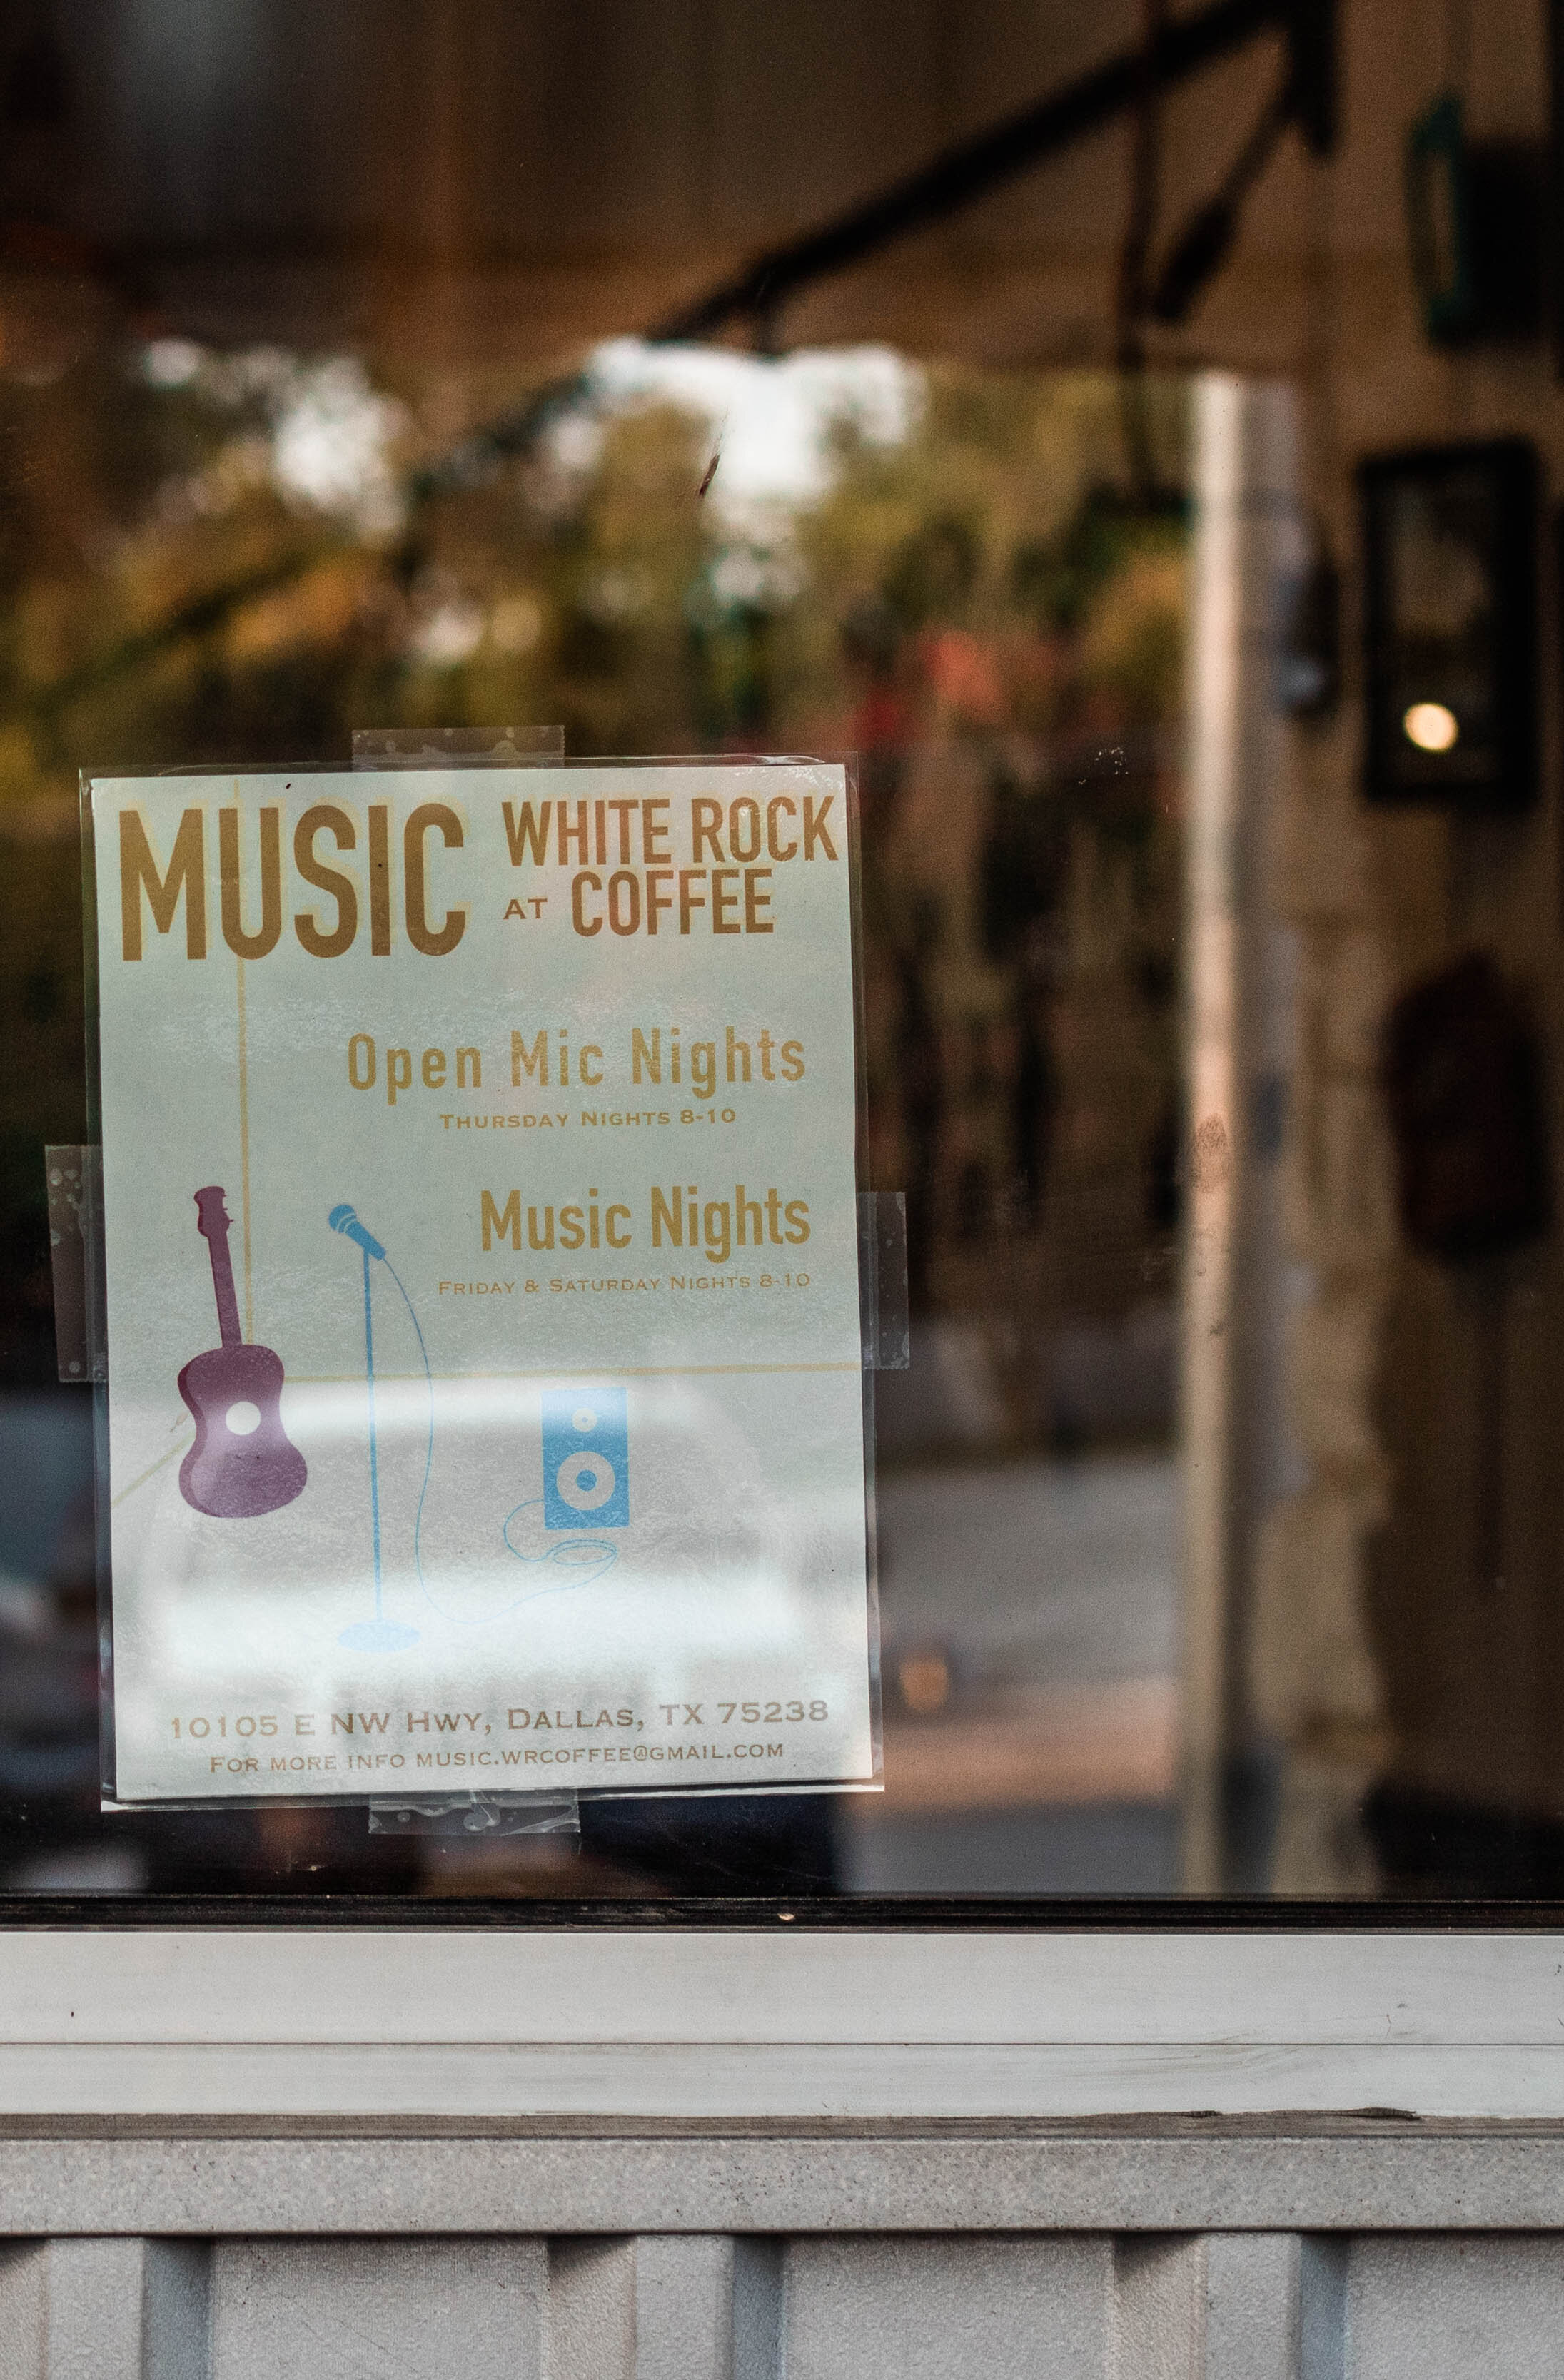 An “Open Mic Night” sign in the window of the coffee shop where Kloepper did her first show in front of family and friends